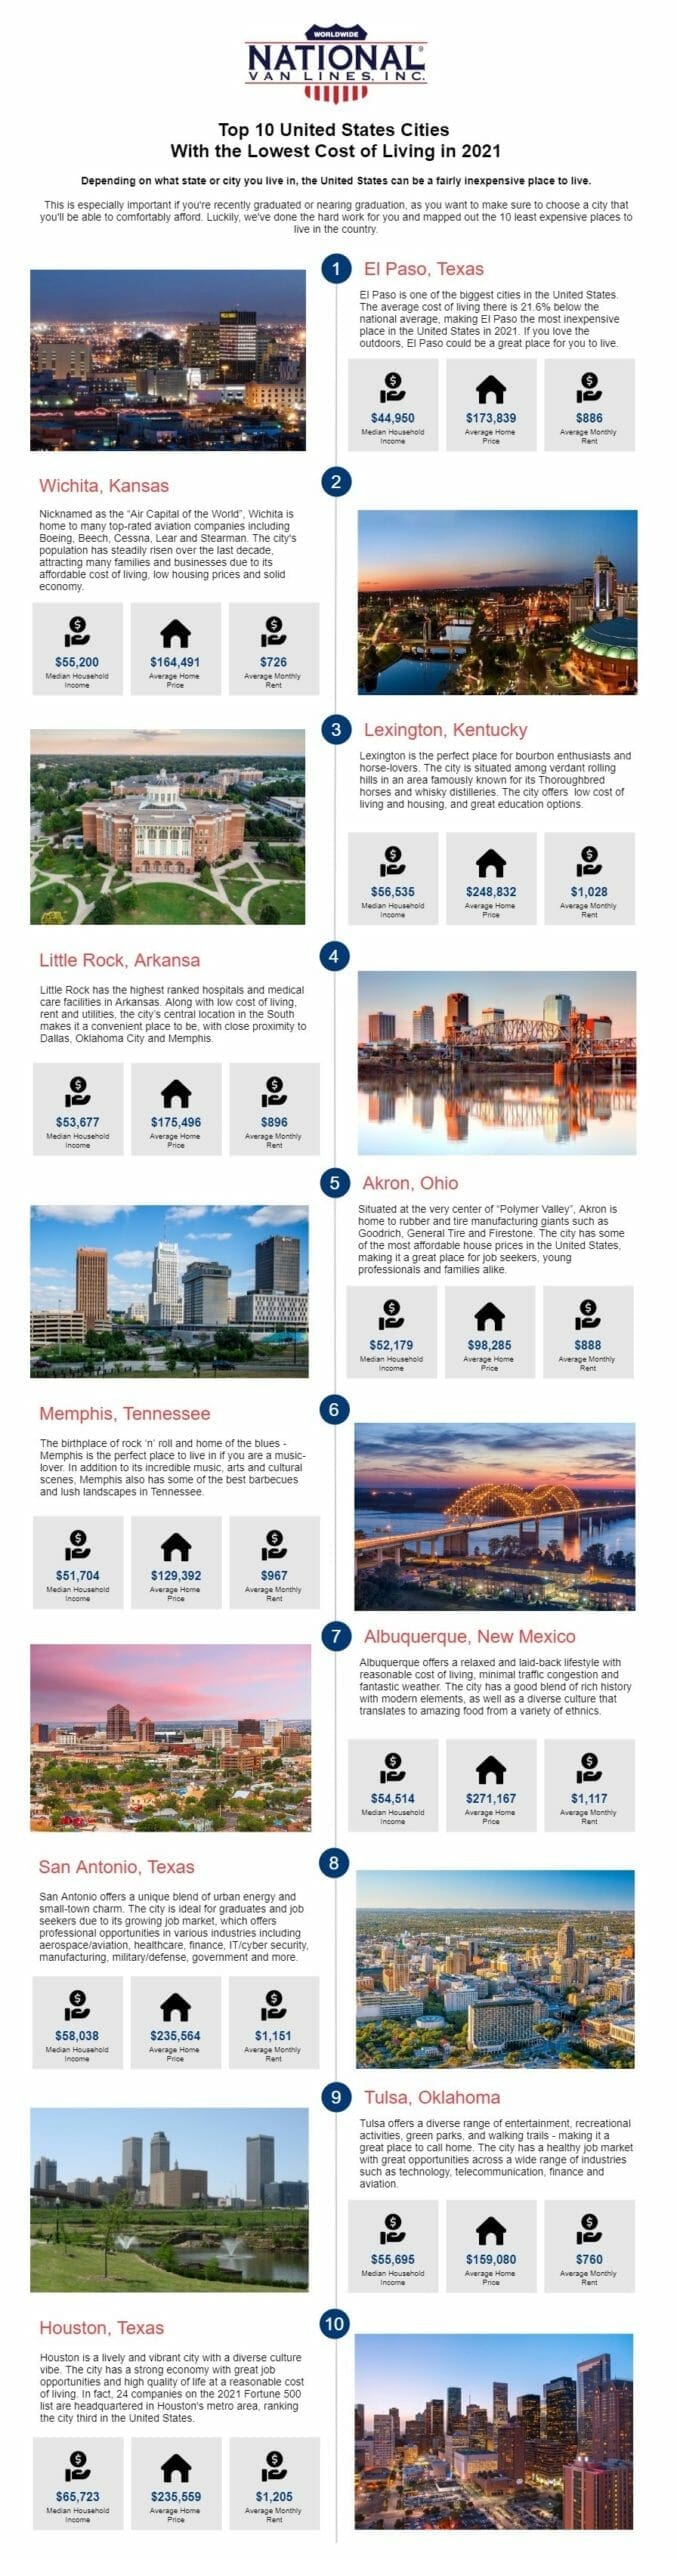 Top 10 Cities With the Lowest Cost of Living in 2021